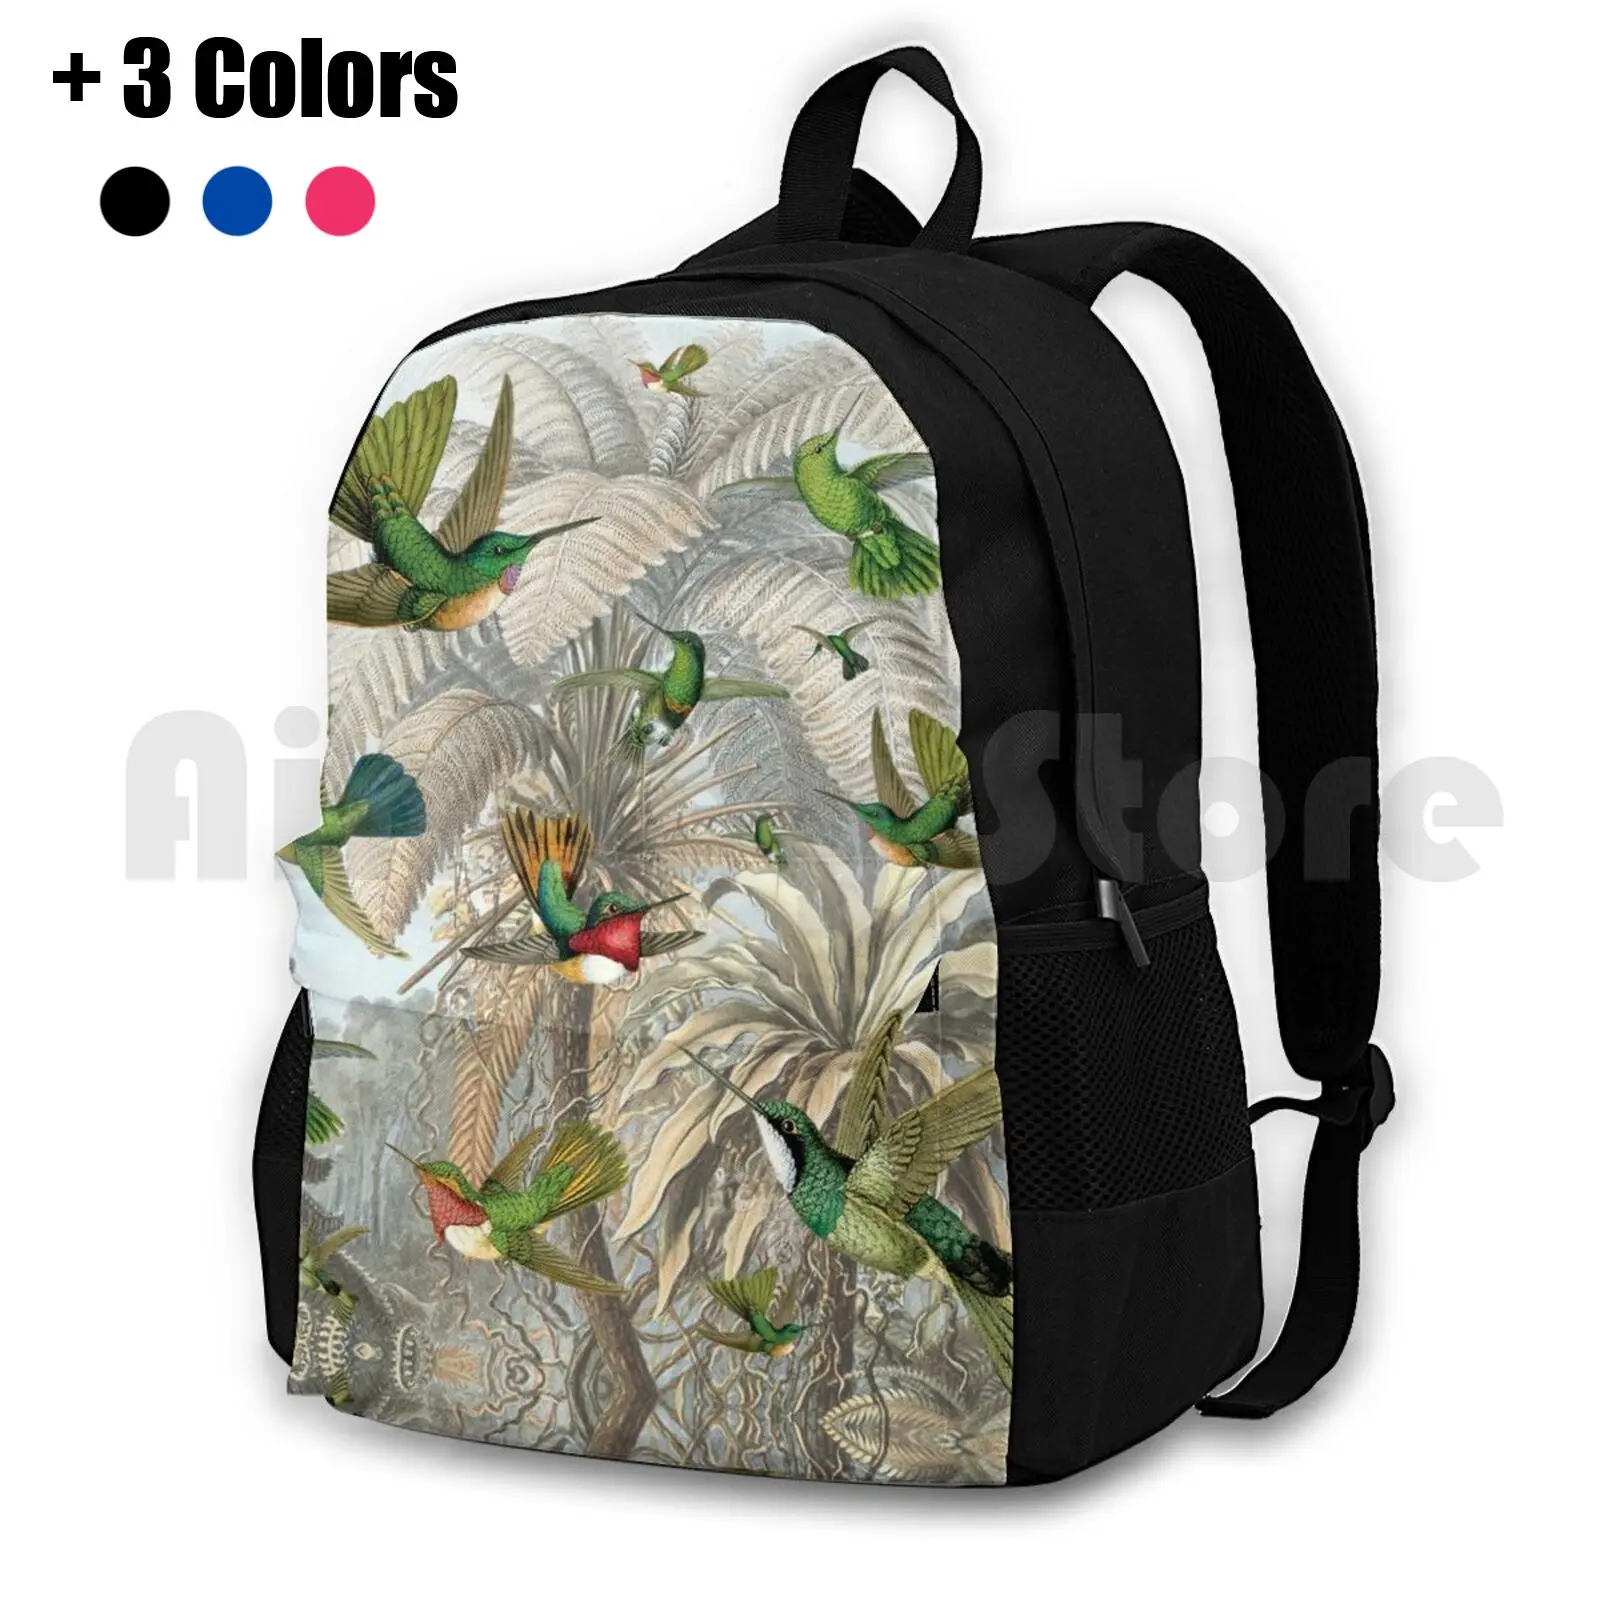 

Hummingbirds Outdoor Hiking Backpack Riding Climbing Sports Bag Tropical Palmtree Palm Palm Leaves Green Emerald Green Vintage